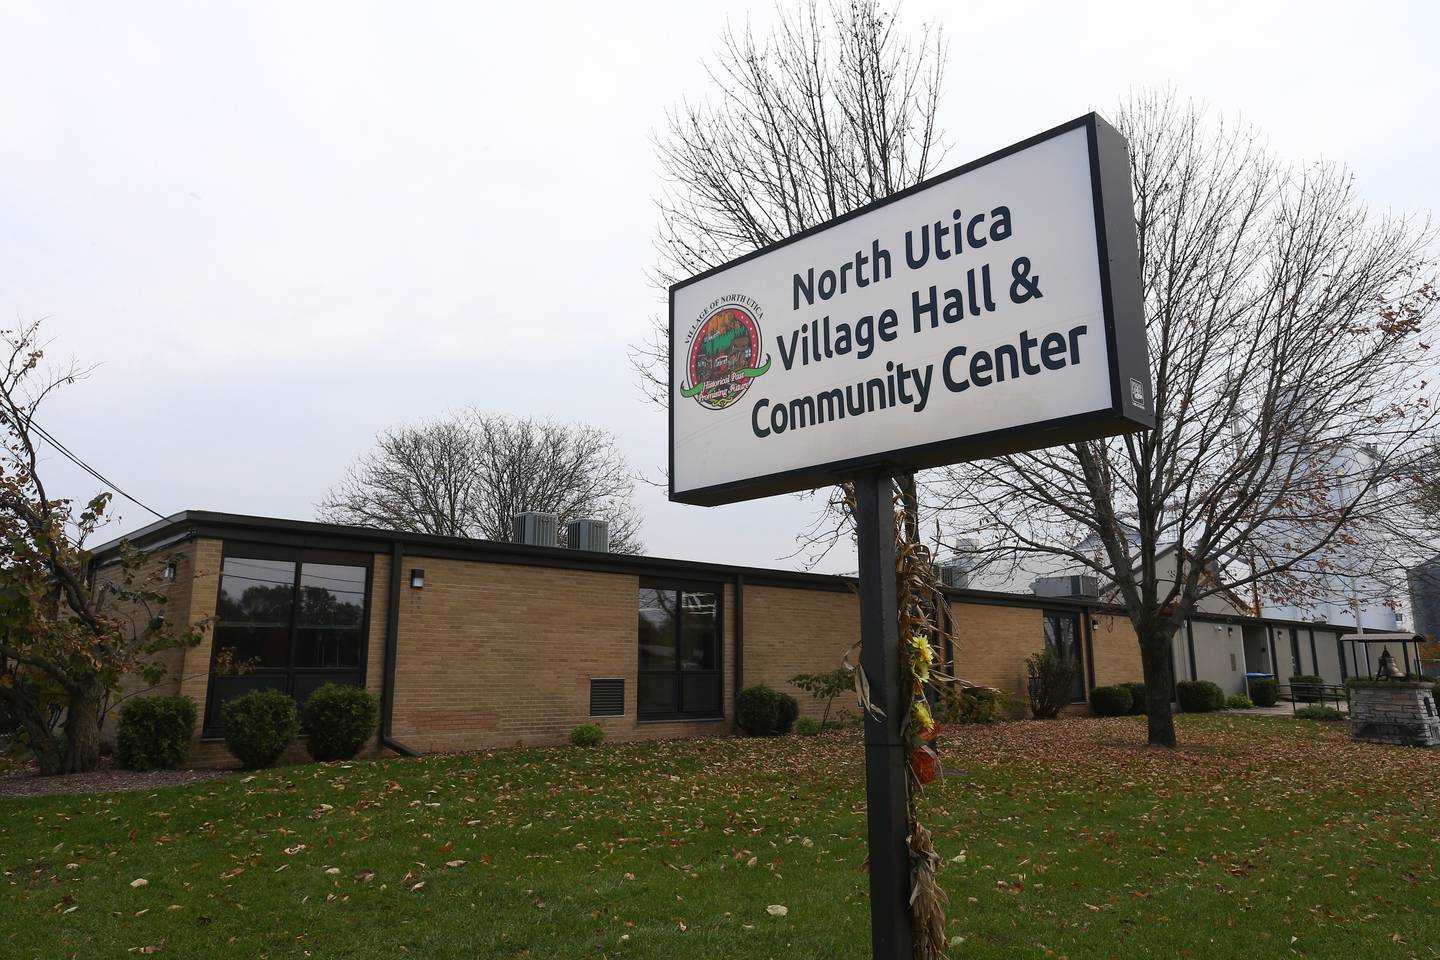 A new sign reads North Utica Village Hall and Community Center in Utica on Wednesday Nov. 9, 2021. The Village purchased the former Waltham South School building last year and converted it into offices, meeting rooms and a community center. The building is about ninety percent complete and will be open officially at the beginning of 2022.